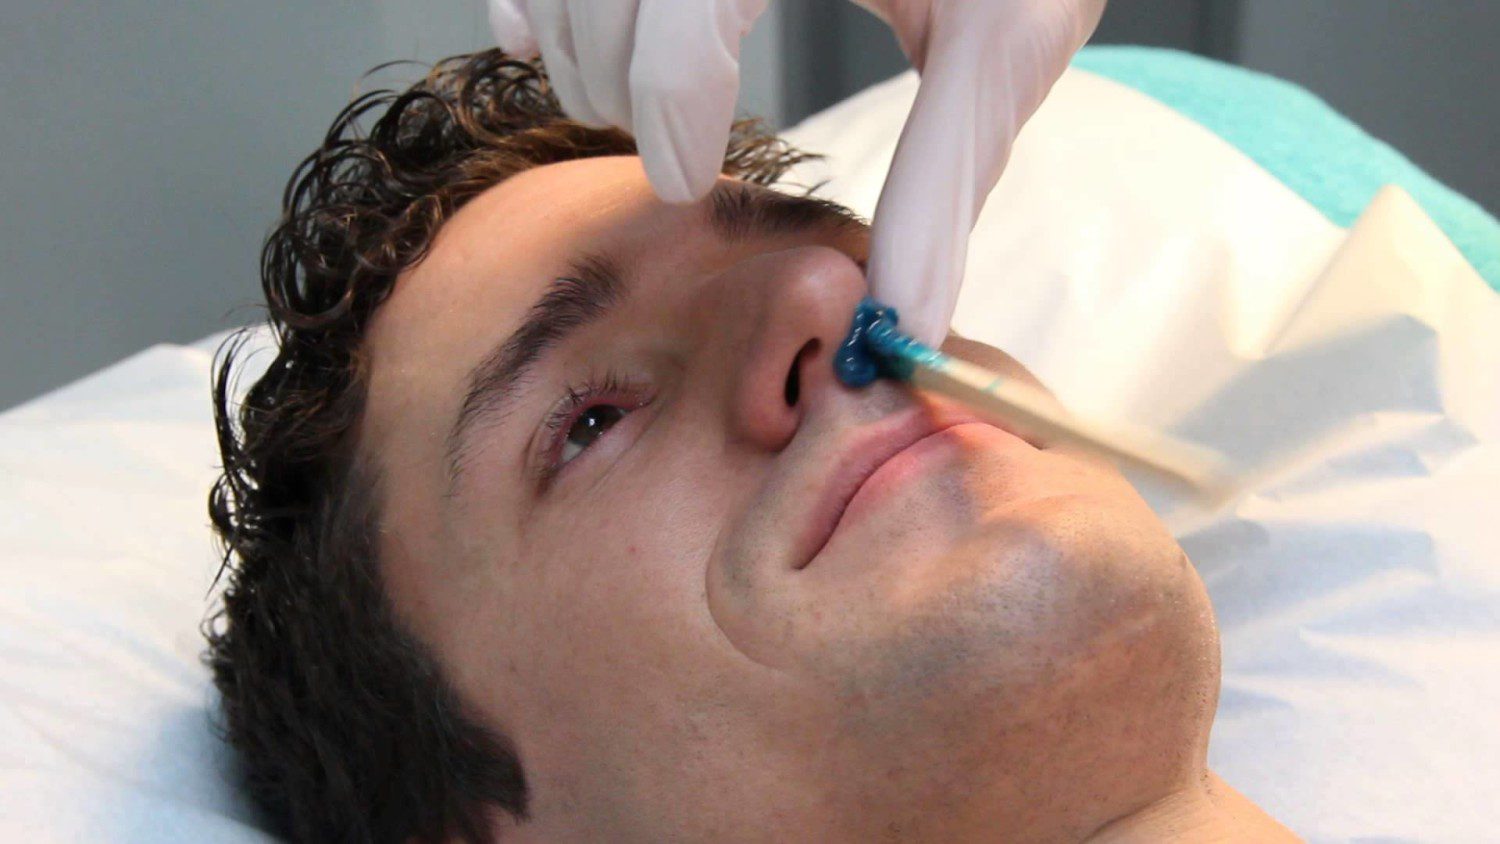 A man is getting his nose cleaned by someone.